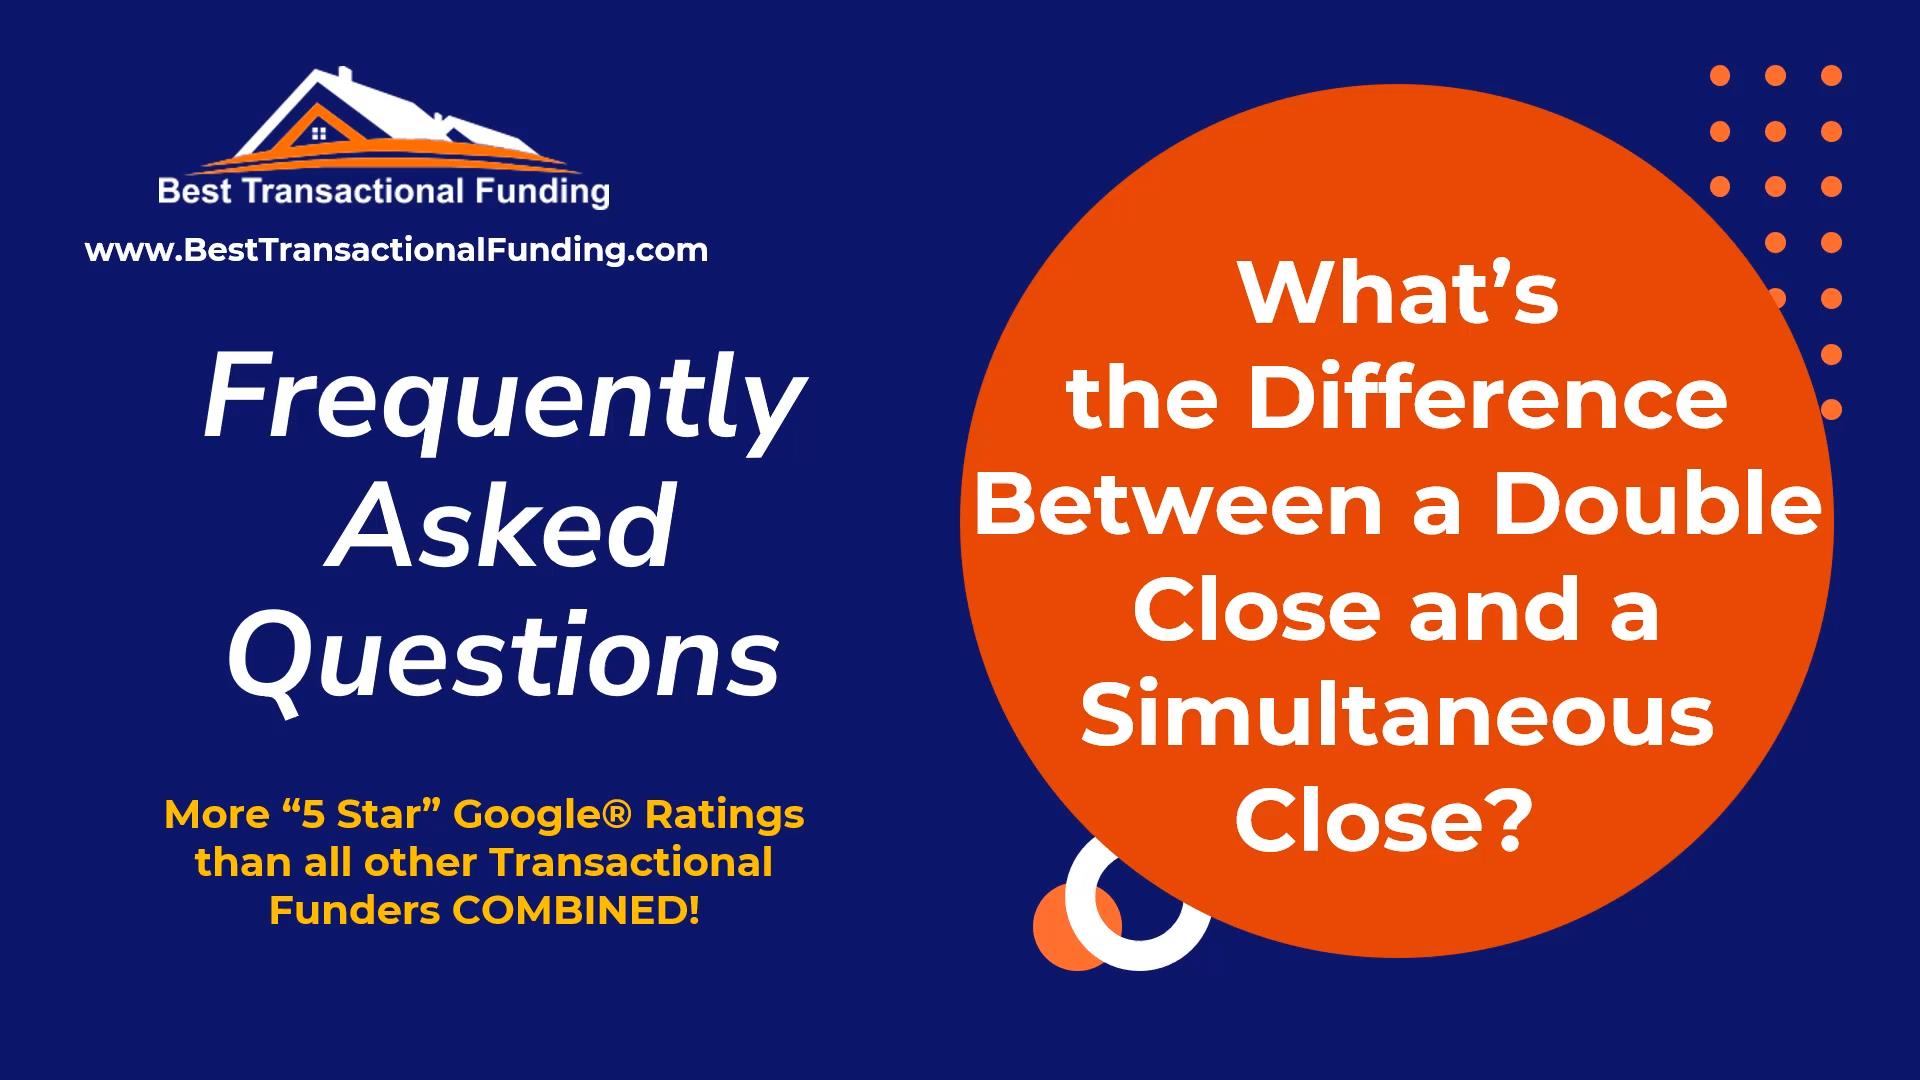 Confused about the differences between a double close and a simultaneous close? Here's some help to decode them.